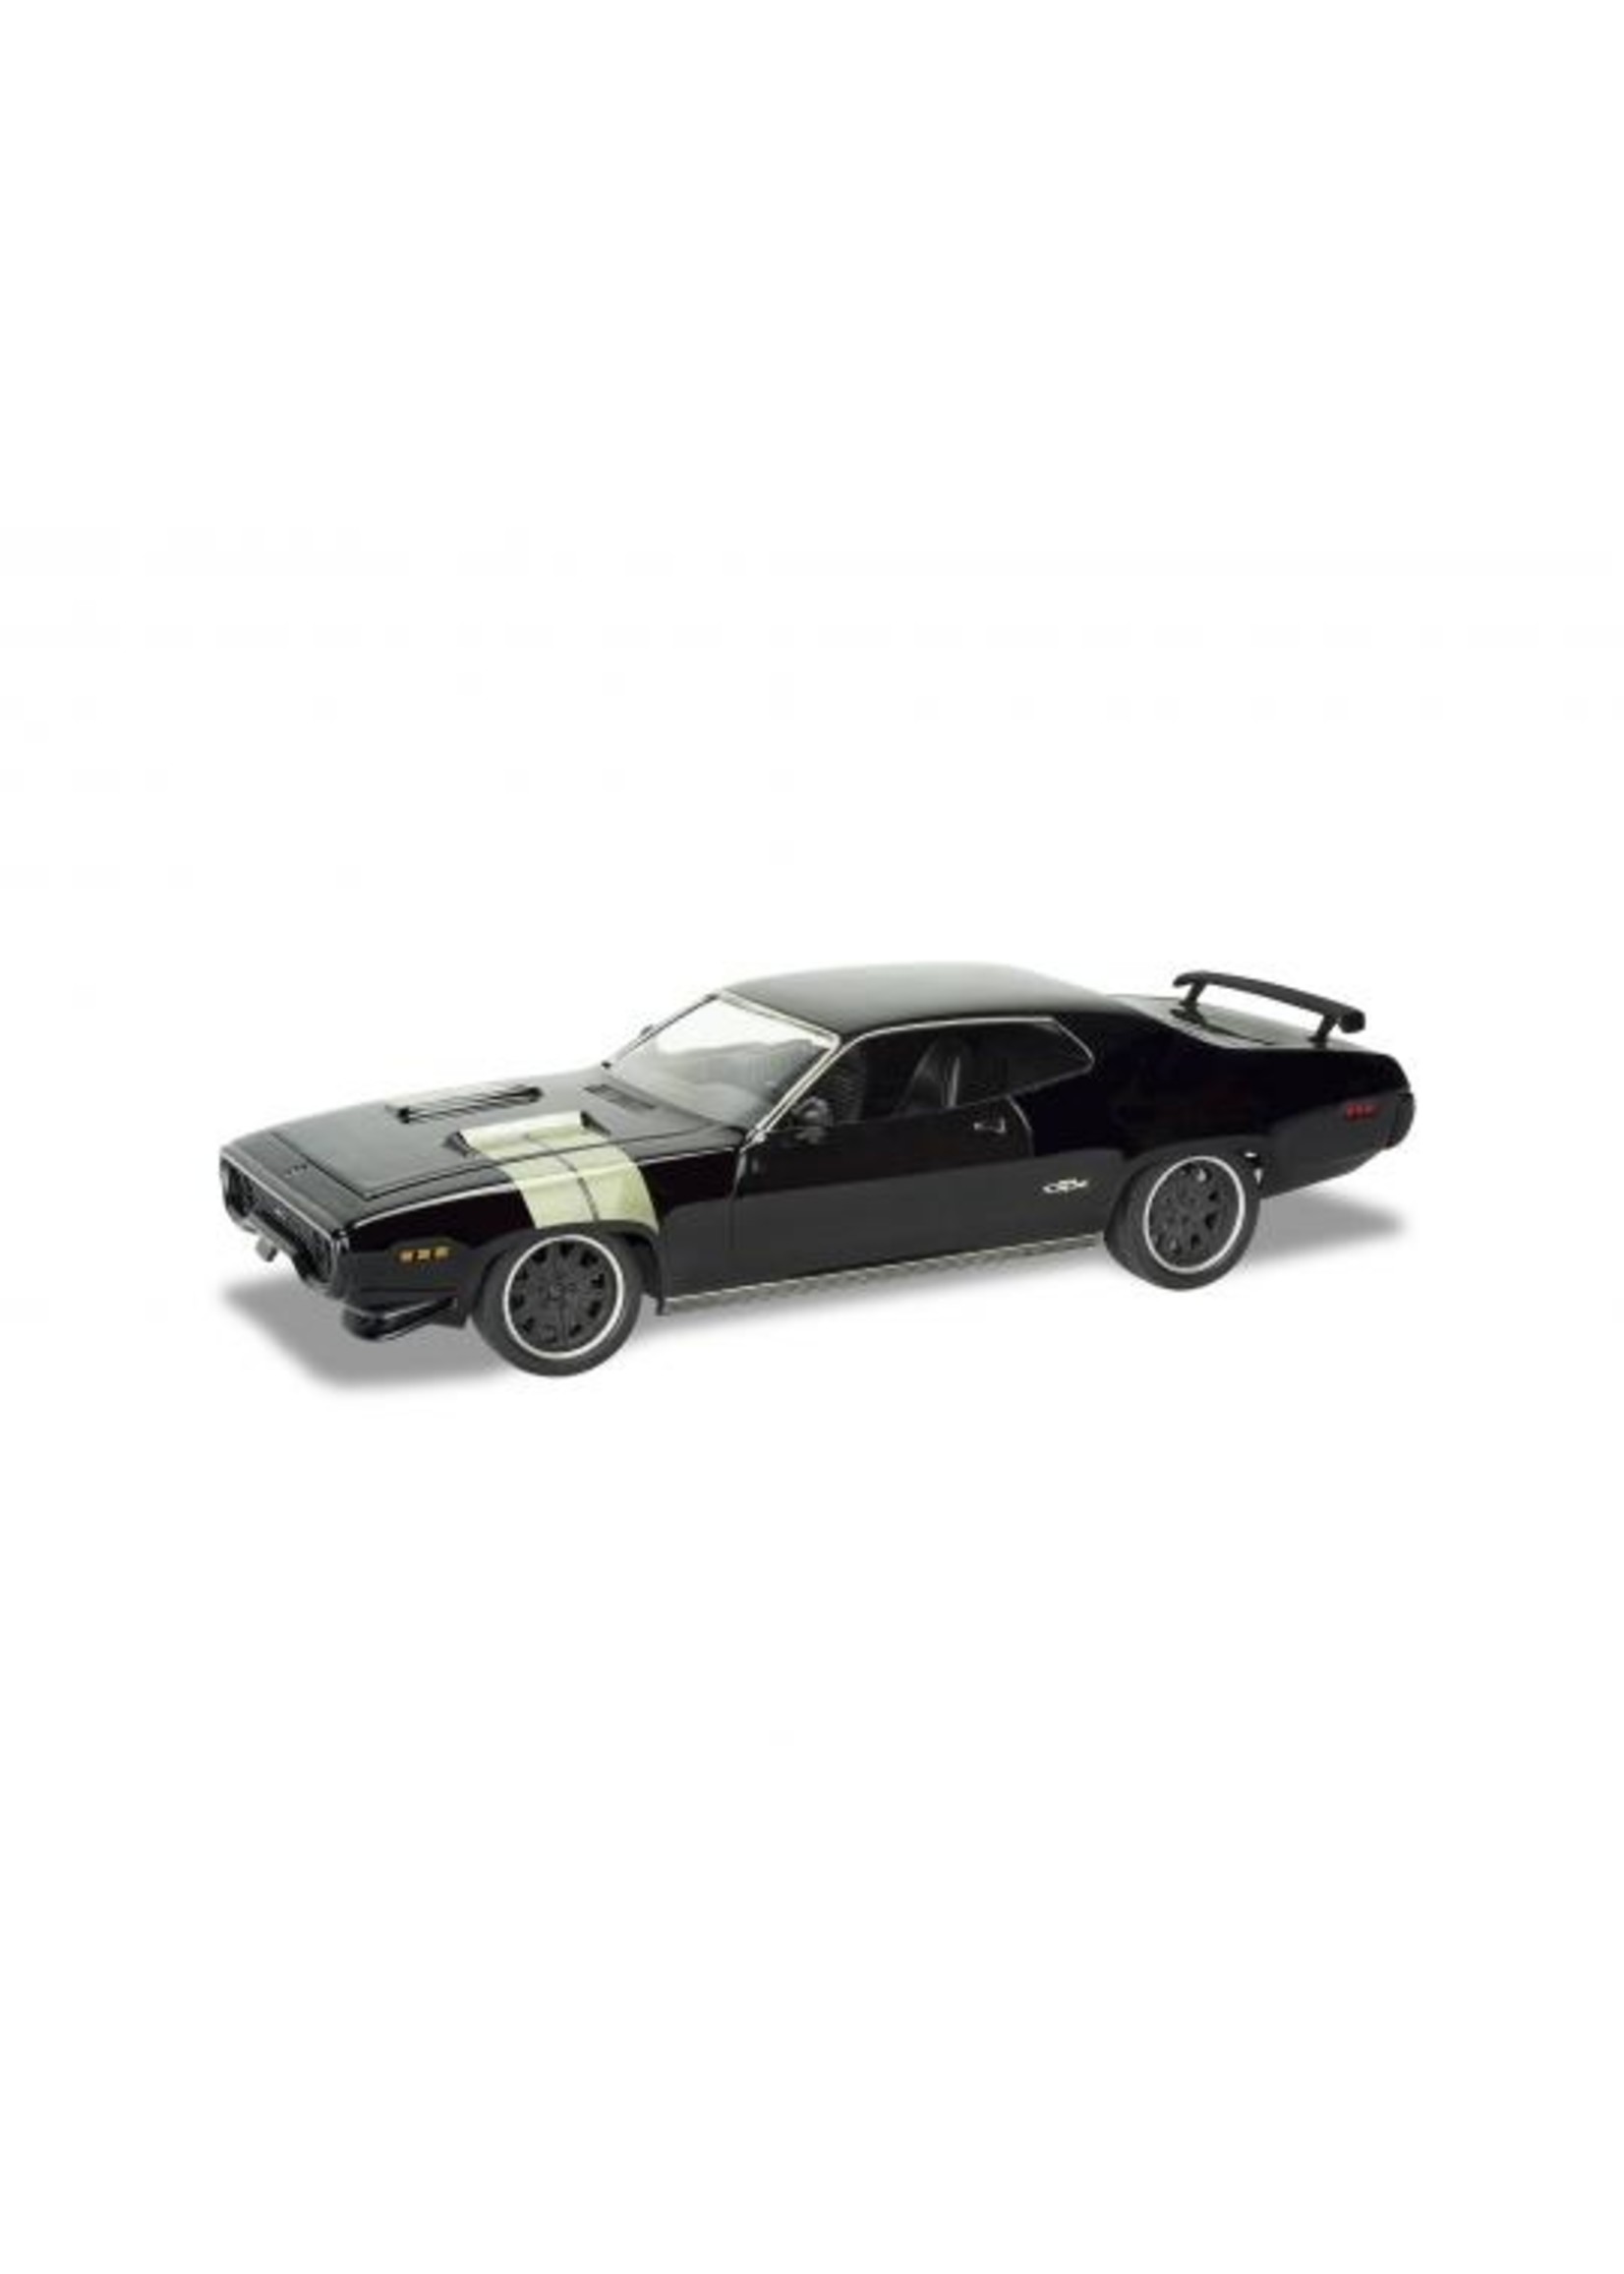 Revell 4477 - 1/24 Dom's Plymouth GTX 2n1